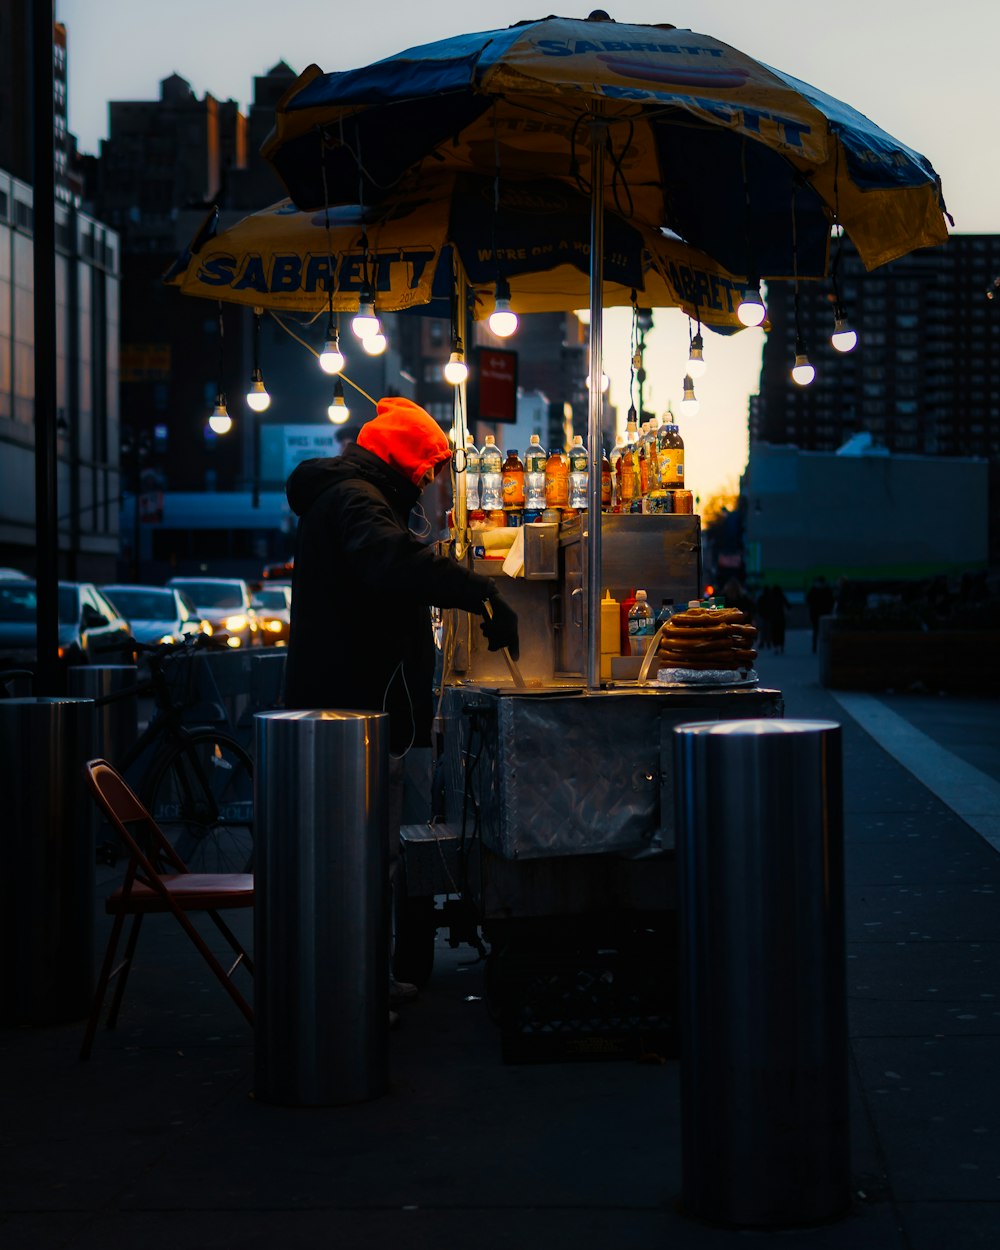 person in red hoodie standing near food stall during night time